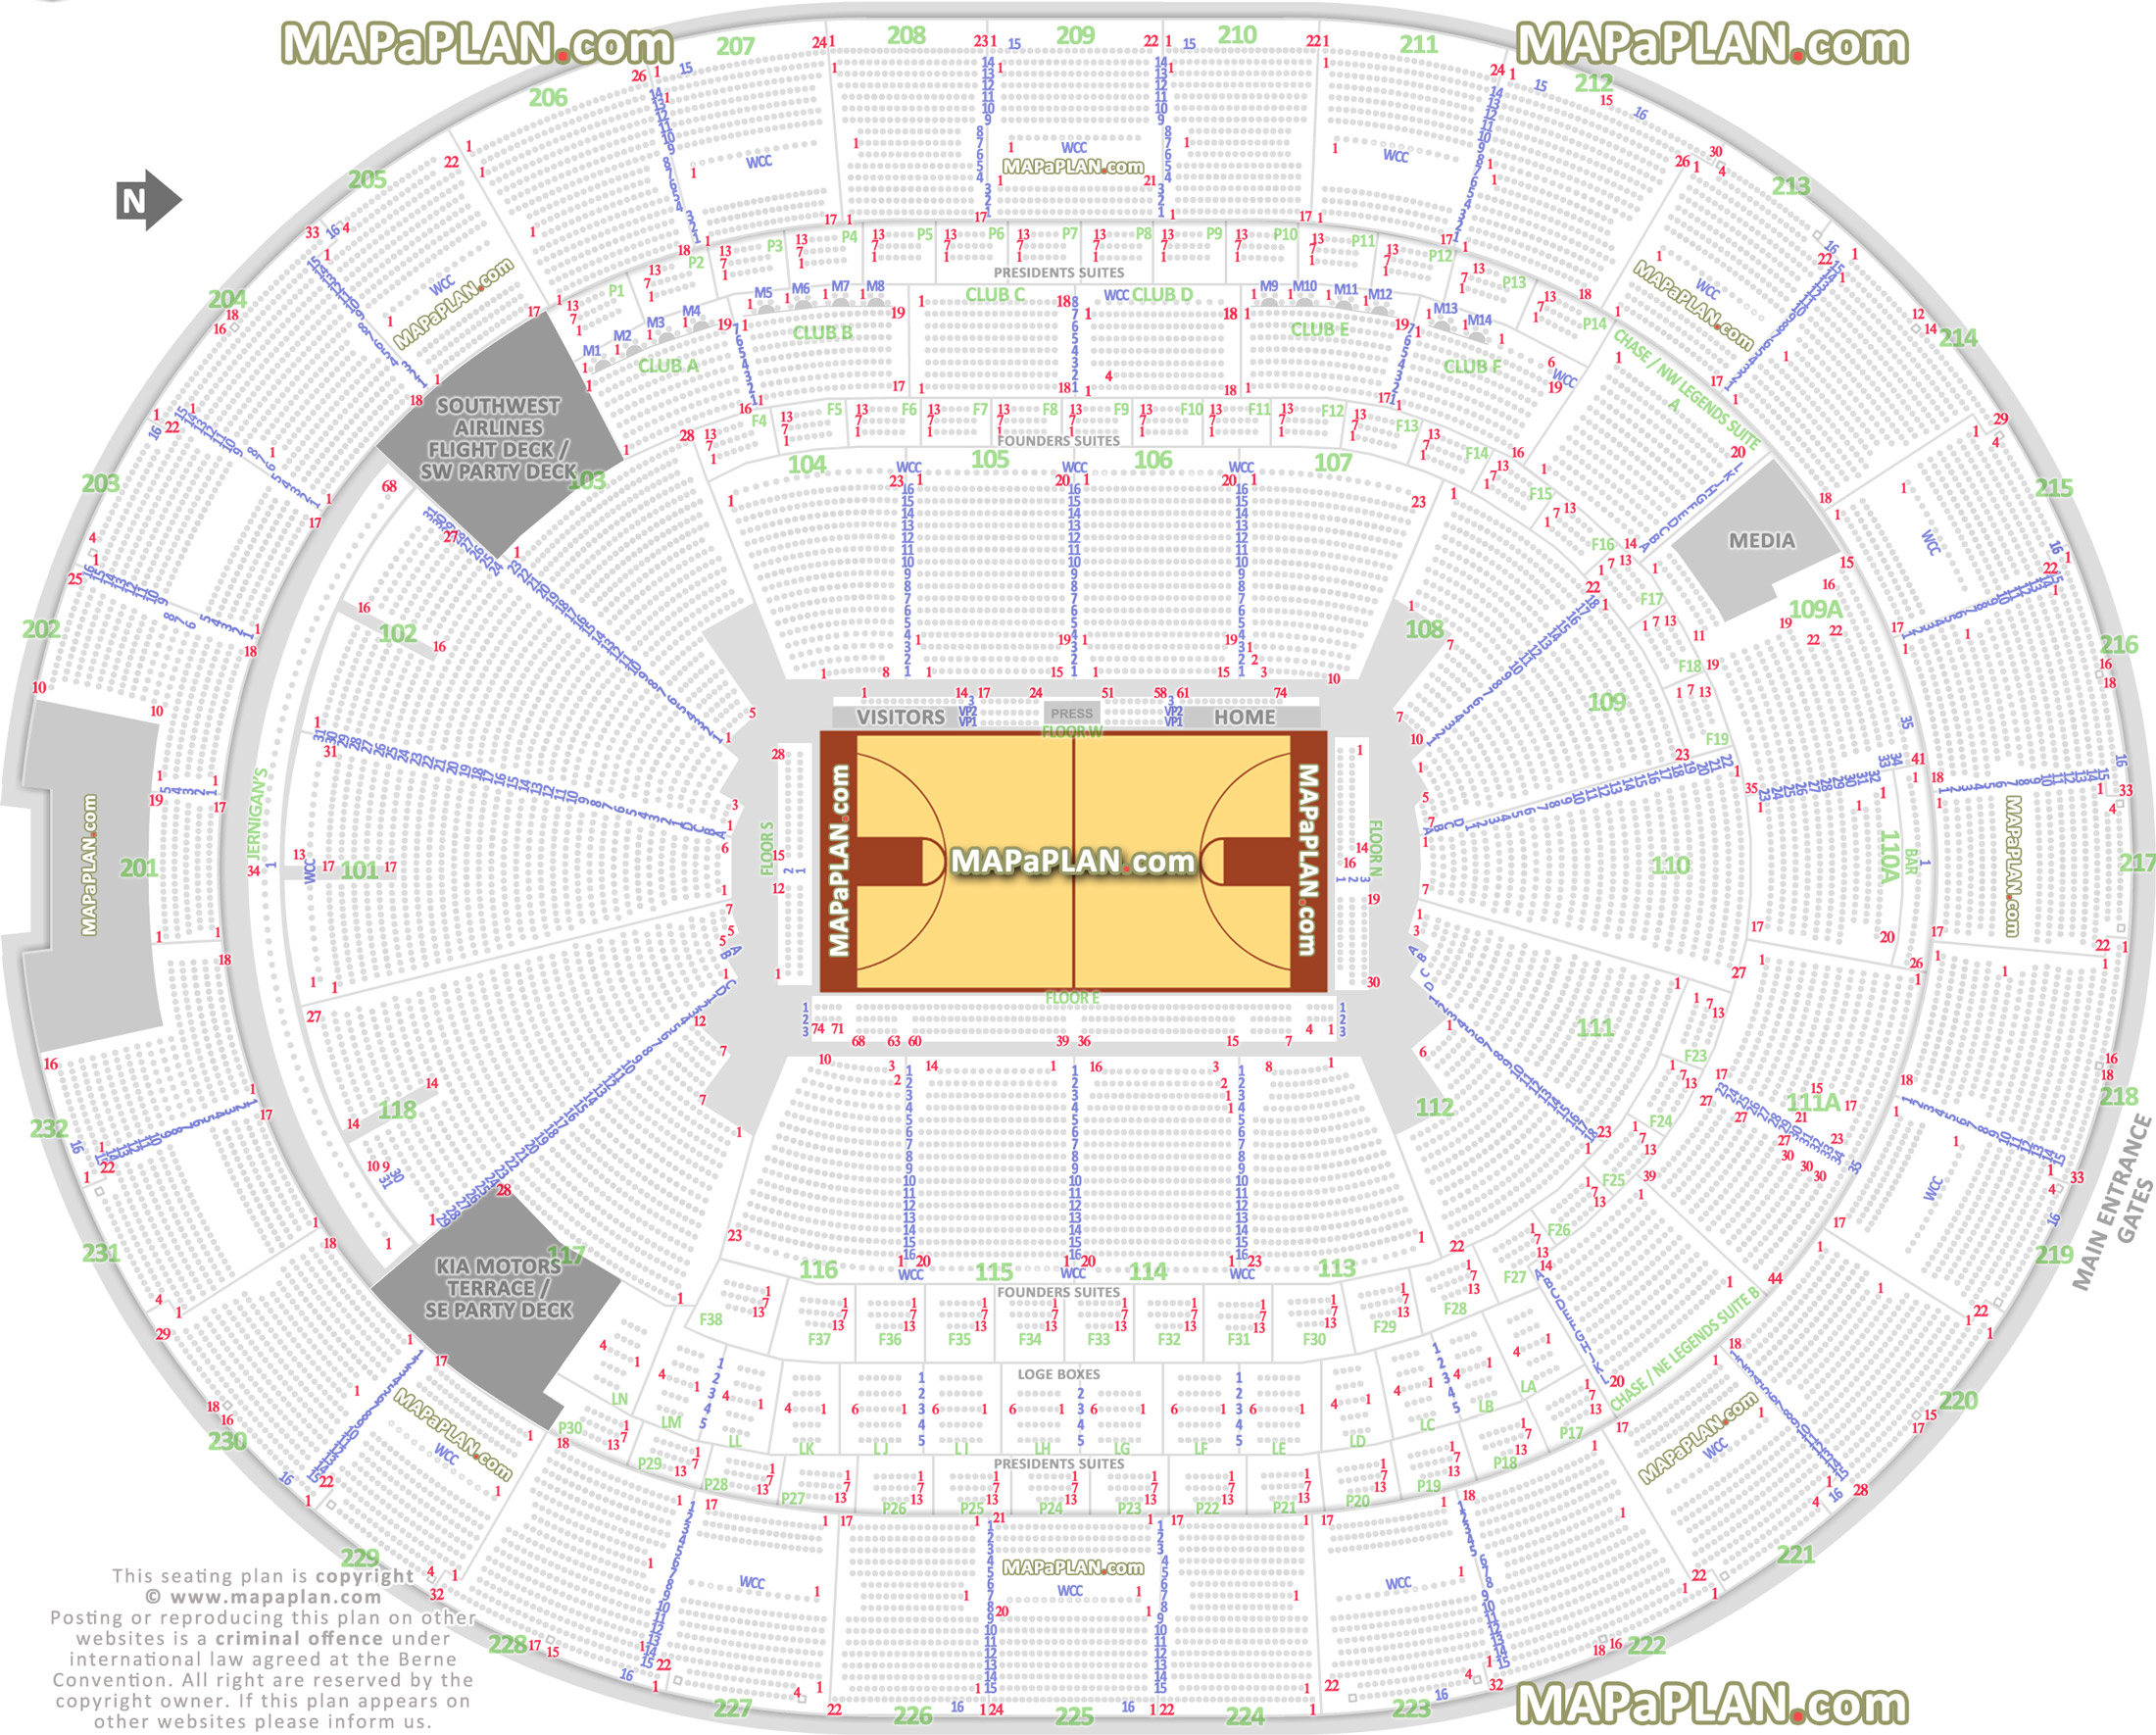 Orlando Magic Seating Chart With Rows